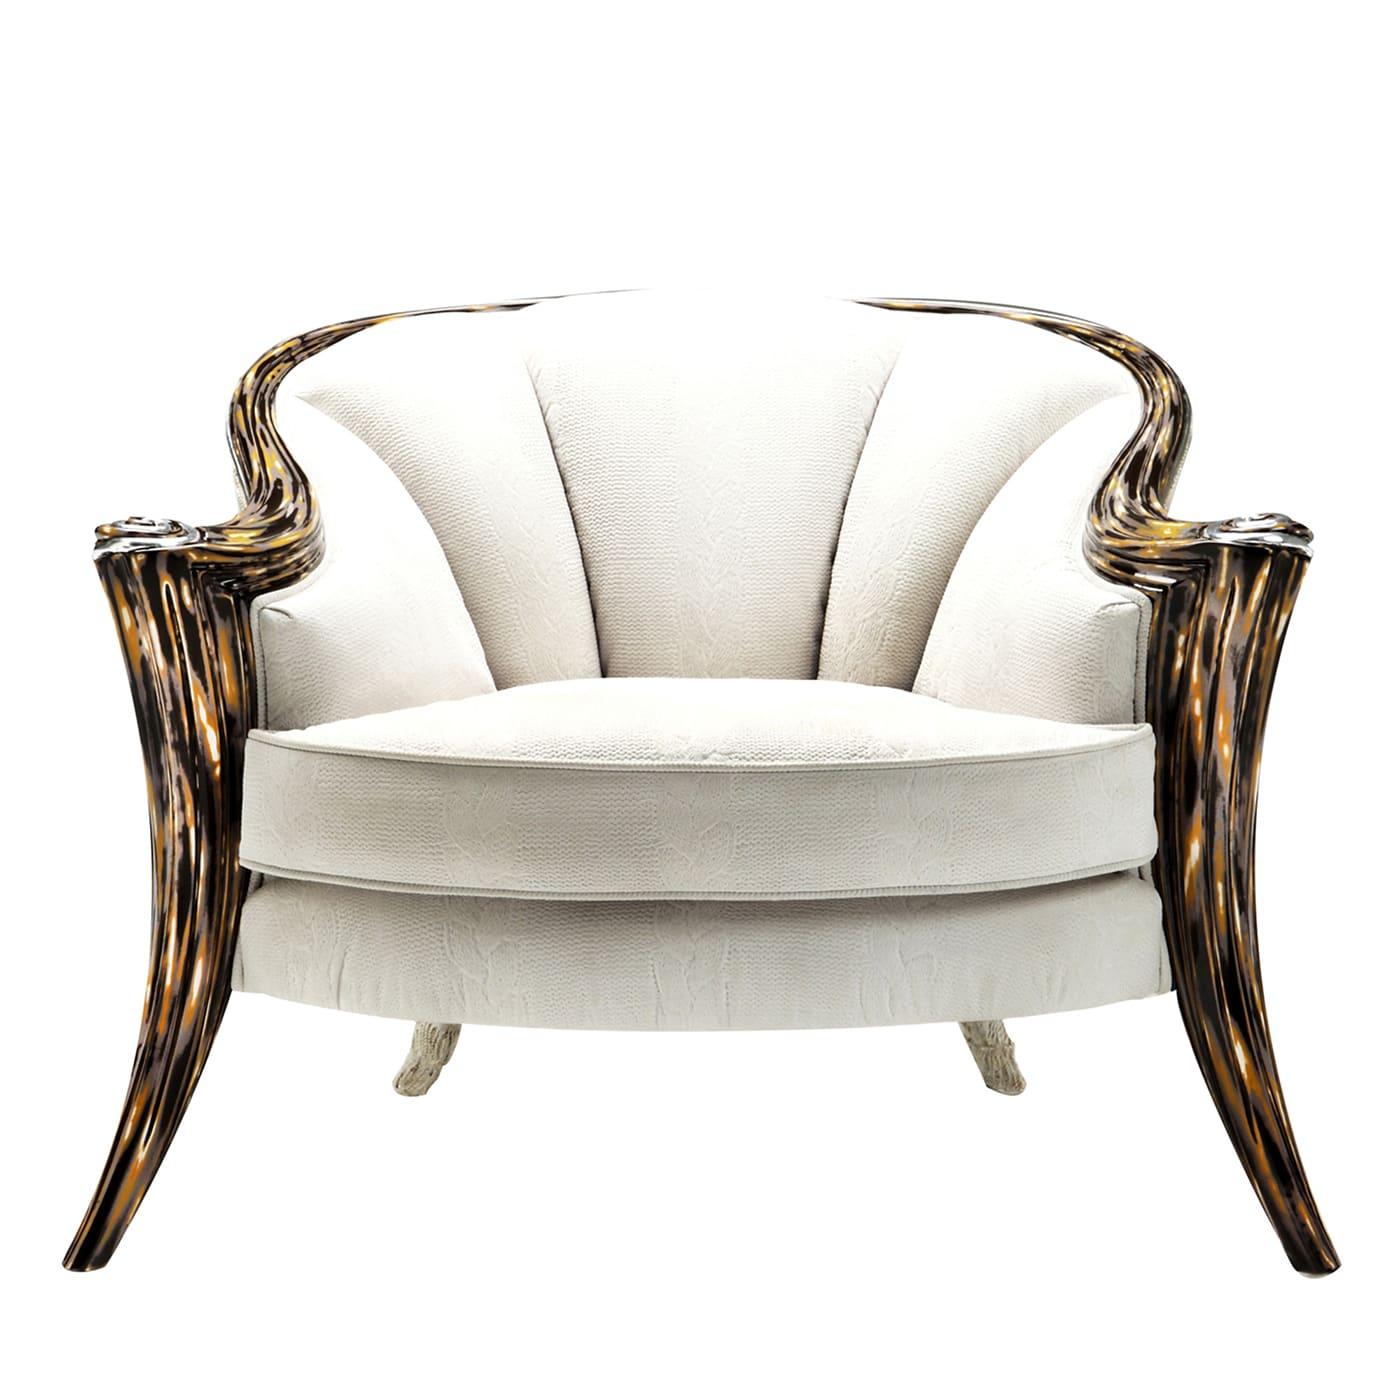 Sitting on this armchair or simply looking at it will equally distill a sense of unattainable exclusivity. The sculpted and sinuous wooden frame boasts the colorful Crazy Glass finish on the front legs, while the back is enriched with fringes and